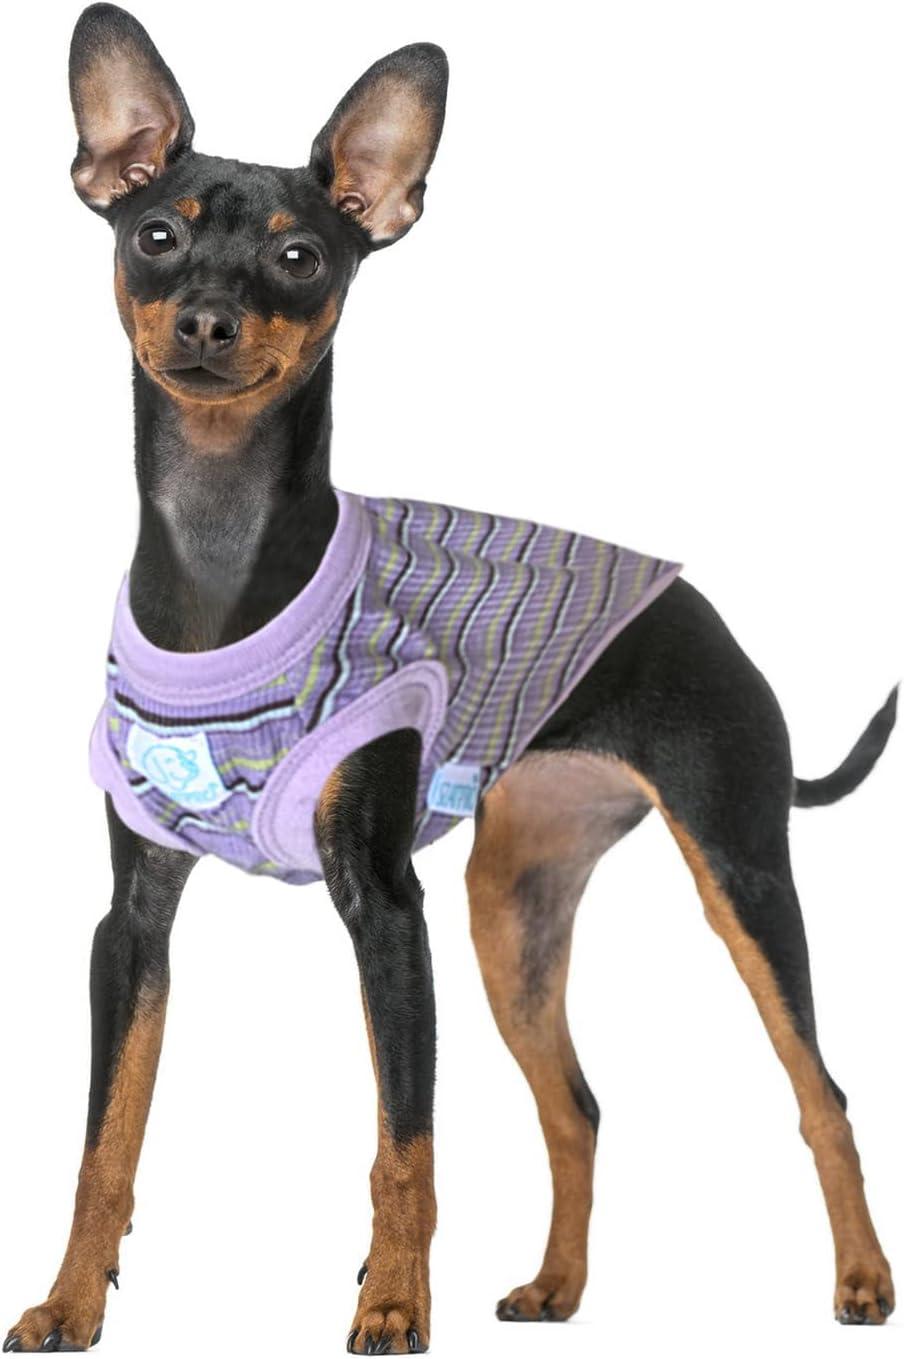  SZAT PRO Striped Teacup Pet Dog T-Shirts, 100% Cotton Tank  Vest for Small Dogs and Cats, Sleeveless Puppy Clothes for Chihuahua Yorkie  Purple,X-Small : Pet Supplies